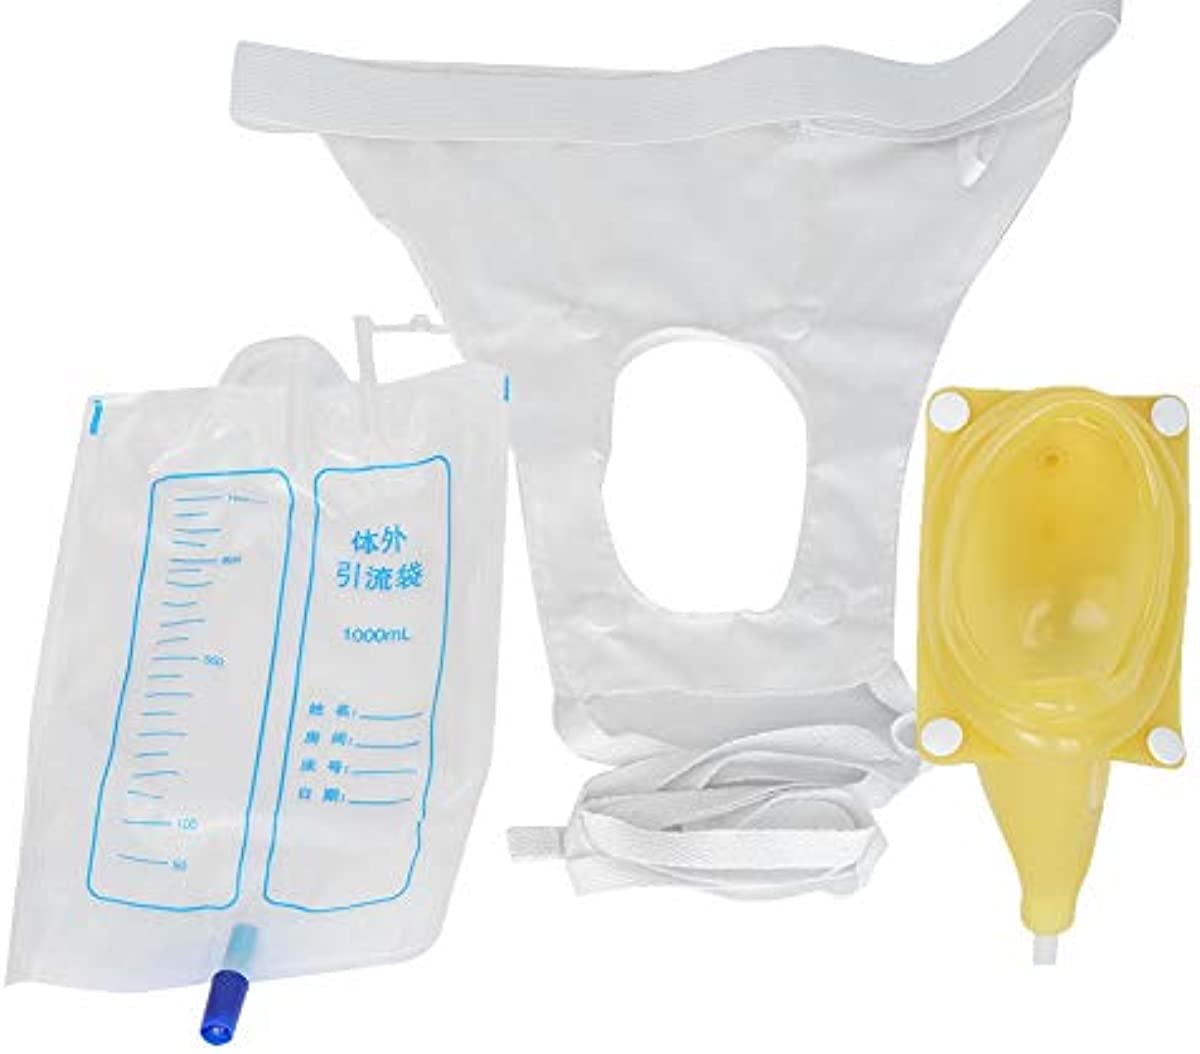 Urine Collector Bag, Adults Urinal with Urine Catheter Bags Latex Ventilate Urine Collector Travel Incontinence Bags with Elastic Waistband for Women Men(Women Normal Type)